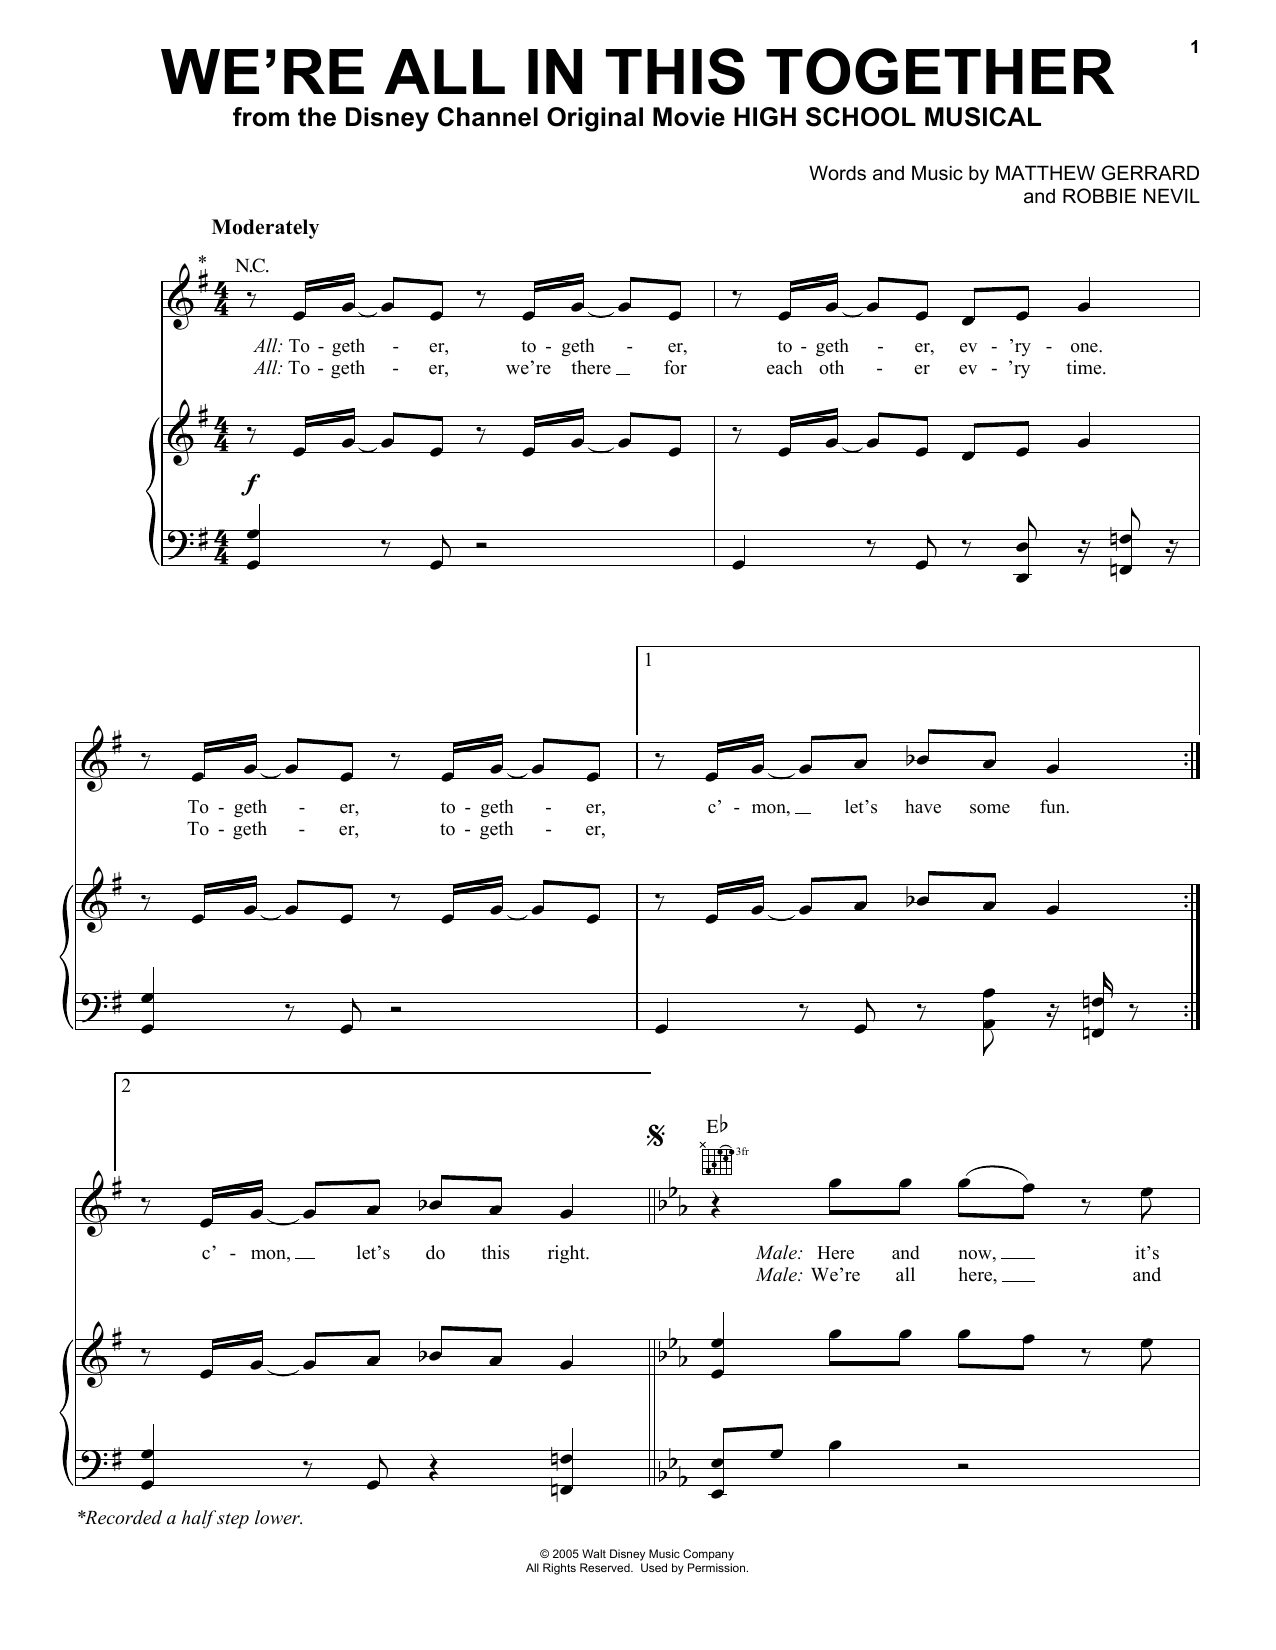 Download High School Musical We're All In This Together Sheet Music